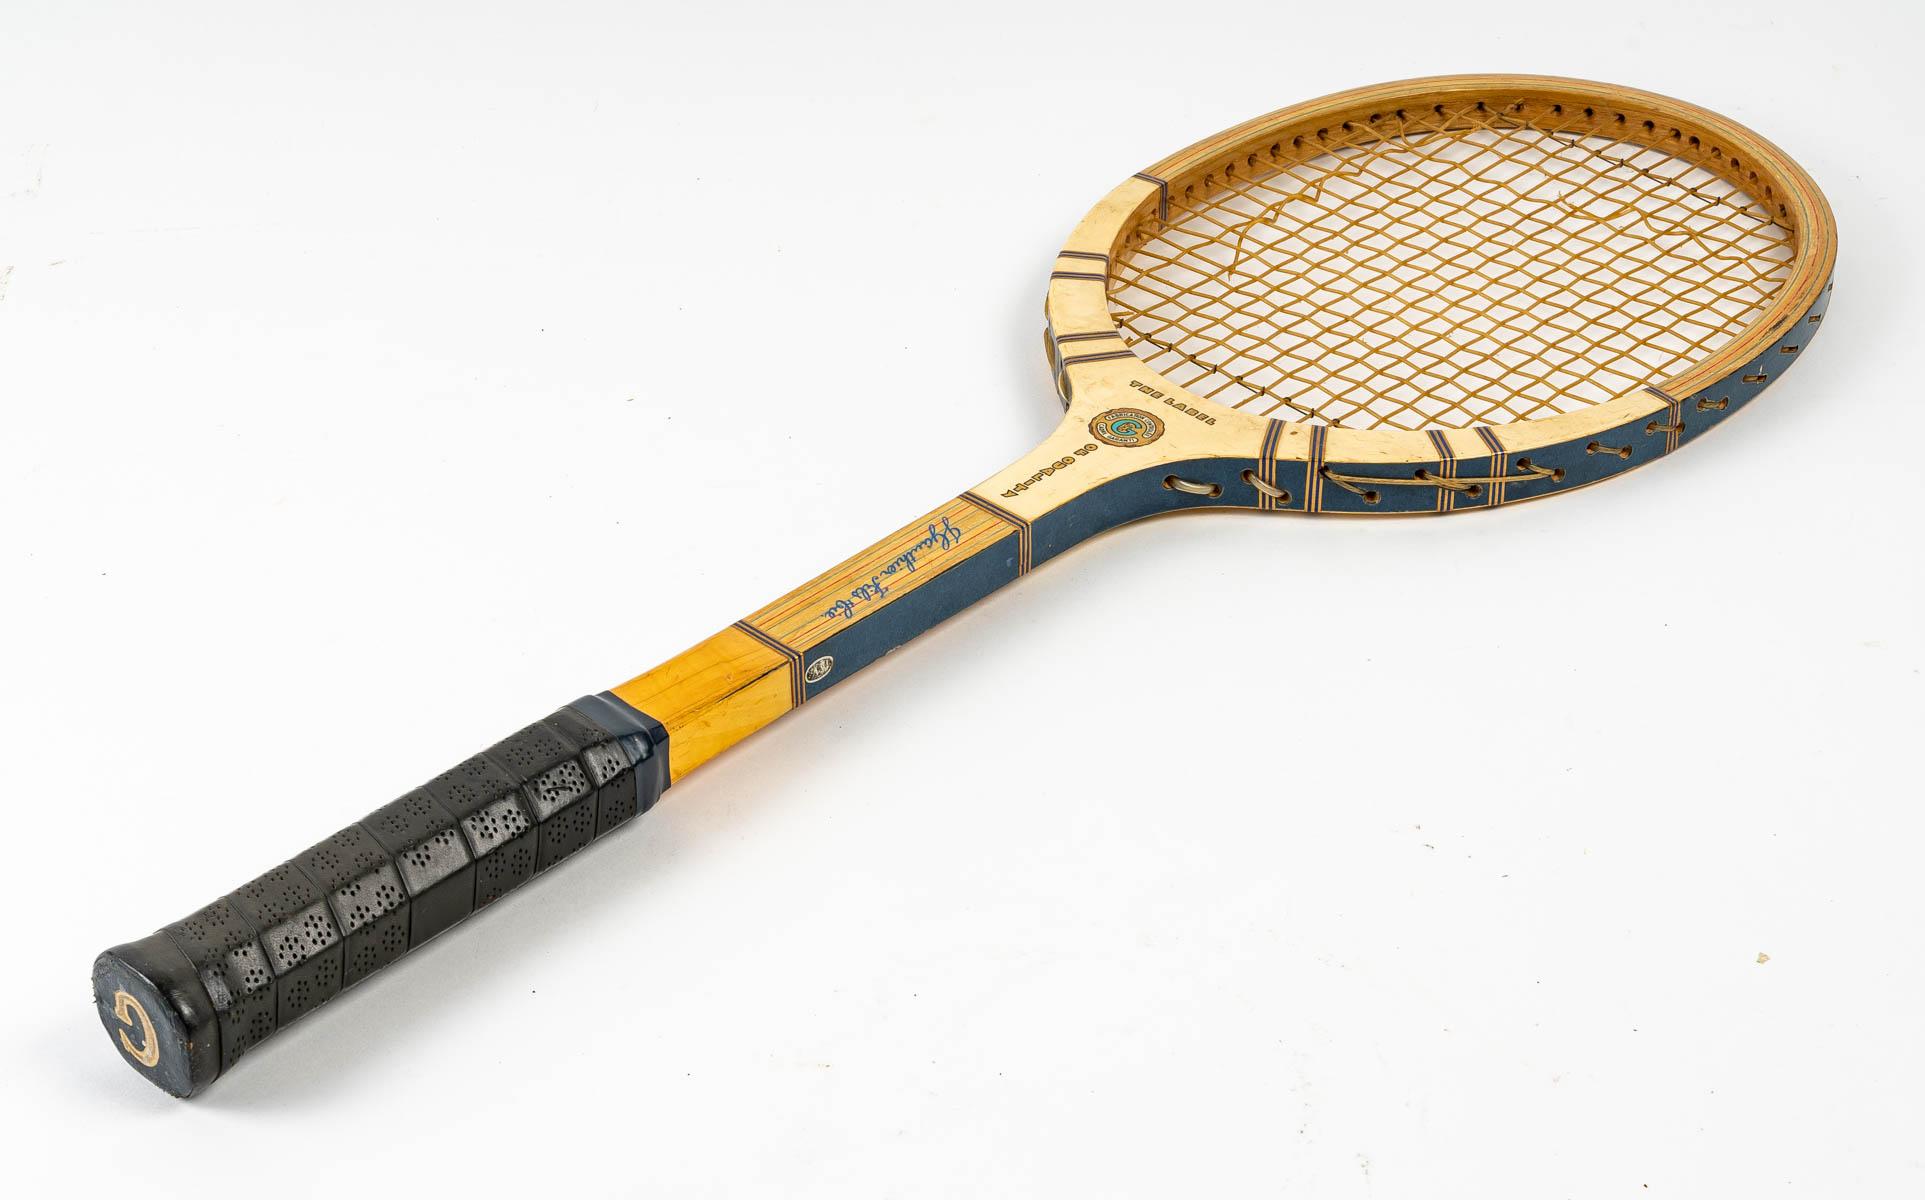 Wood Atlas Tennis Racket, for Championship Play For Sale